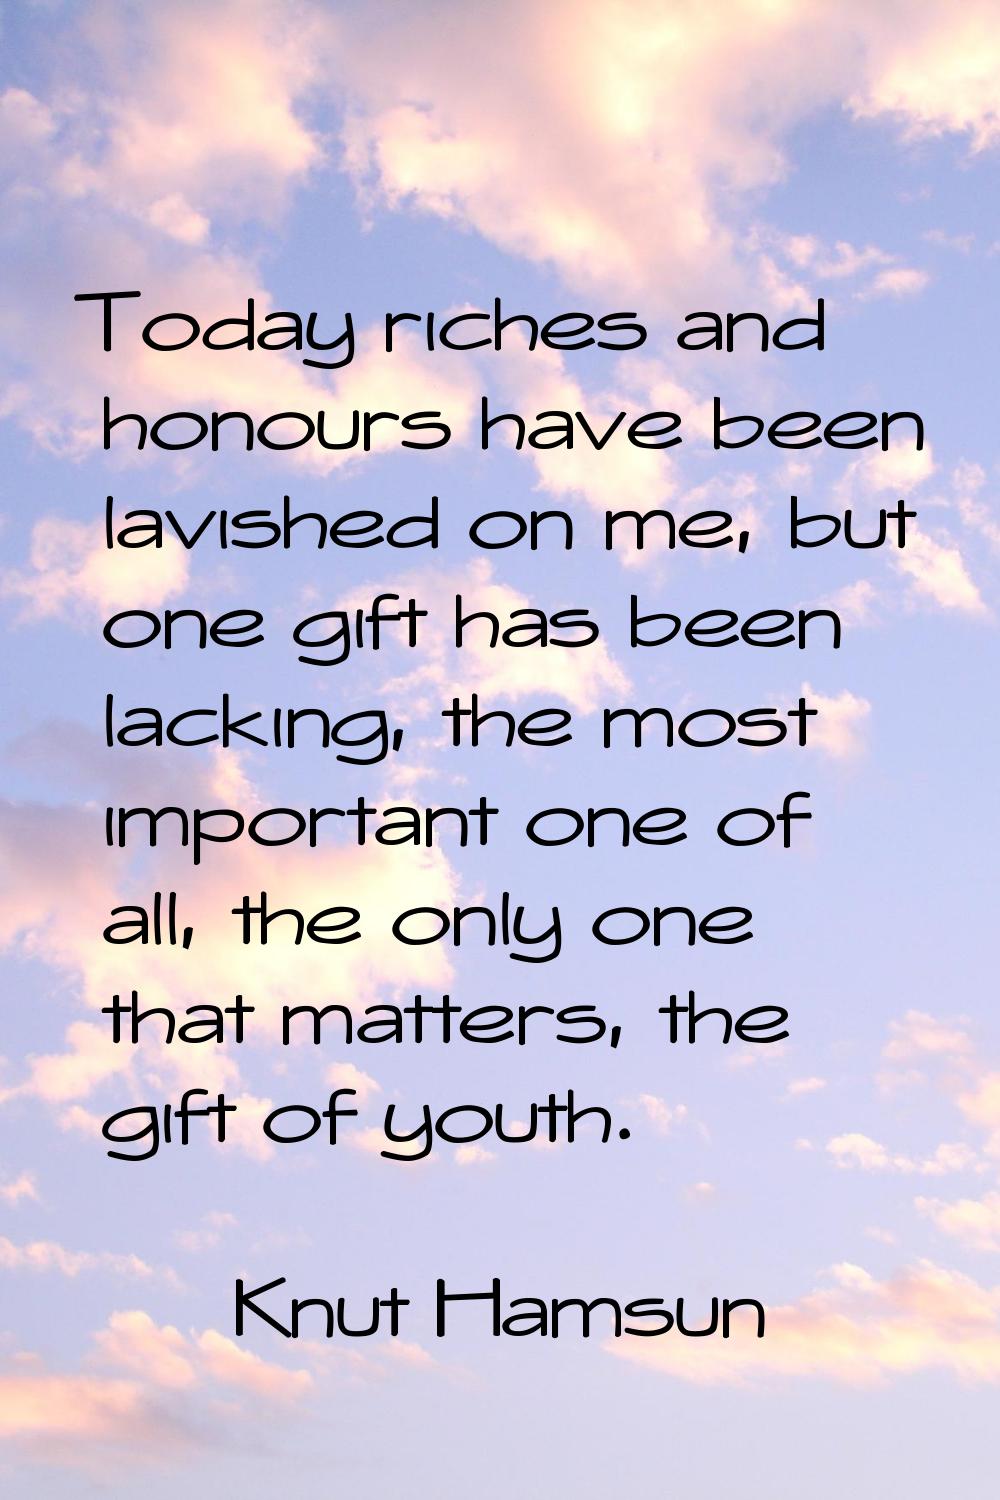 Today riches and honours have been lavished on me, but one gift has been lacking, the most importan